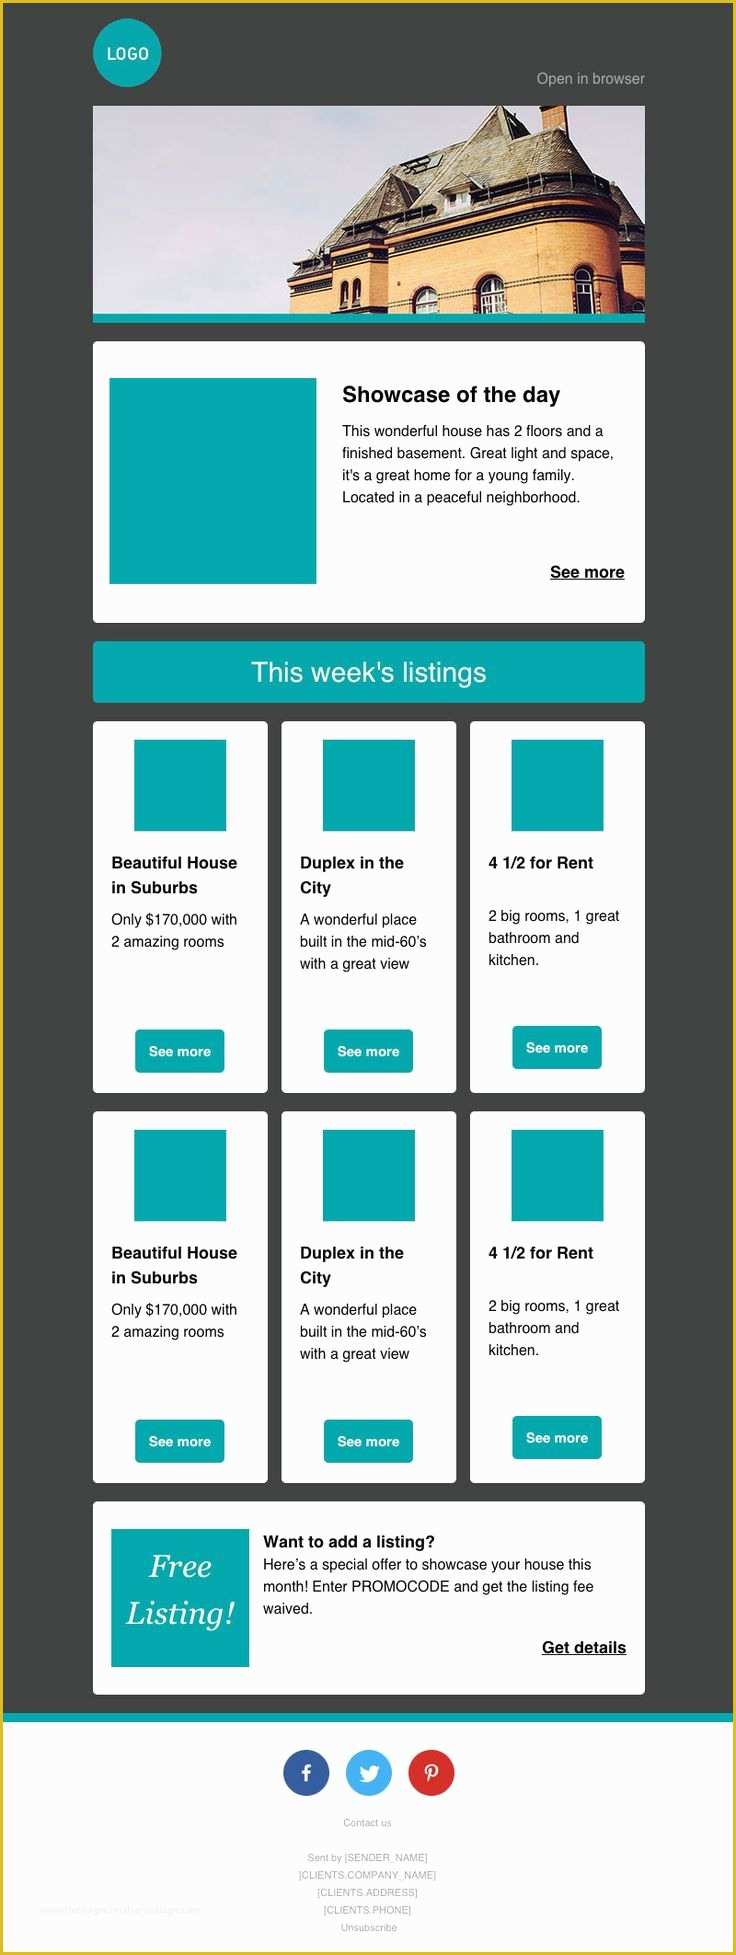 Free Newsletter Templates for Email Marketing Of 17 Best Ideas About Free Email Templates On Pinterest